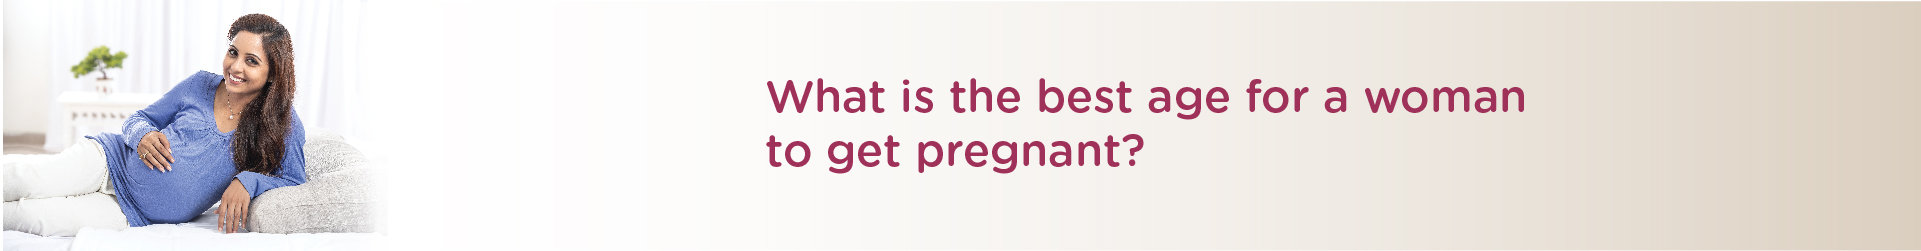 What is the Best Age for a Woman to Get Pregnant?